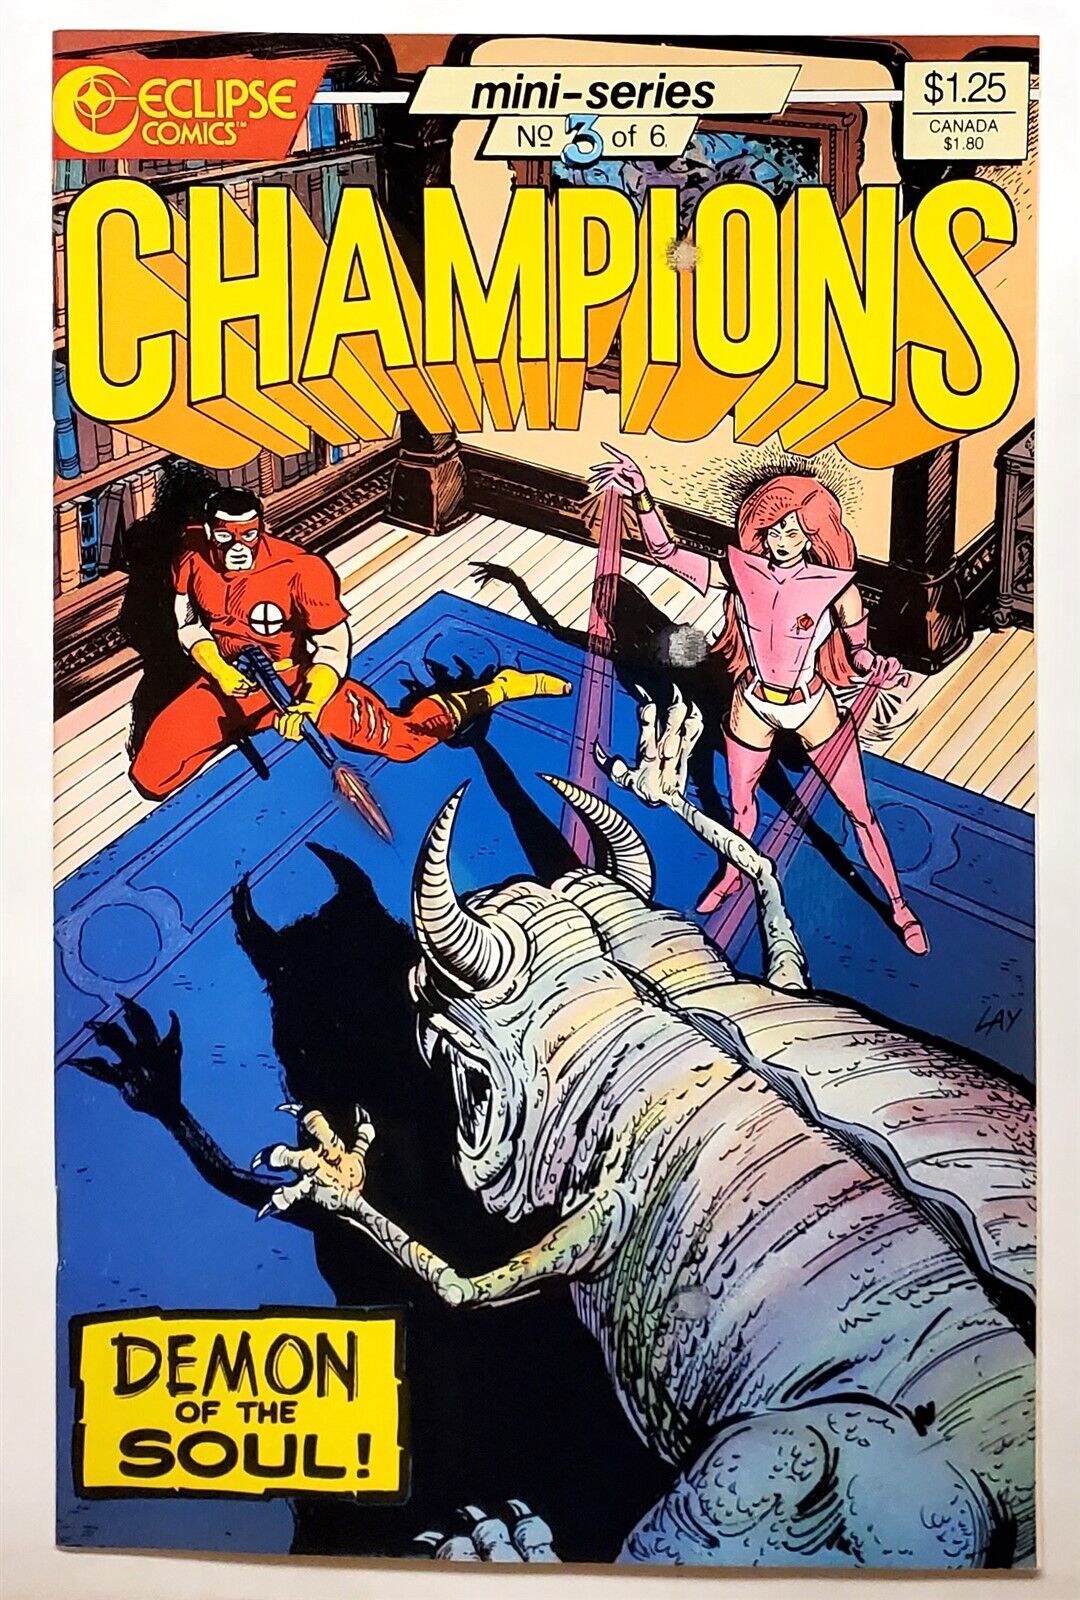 Champions #3 (Oct 1986, Eclipse) 6.5 FN+ 